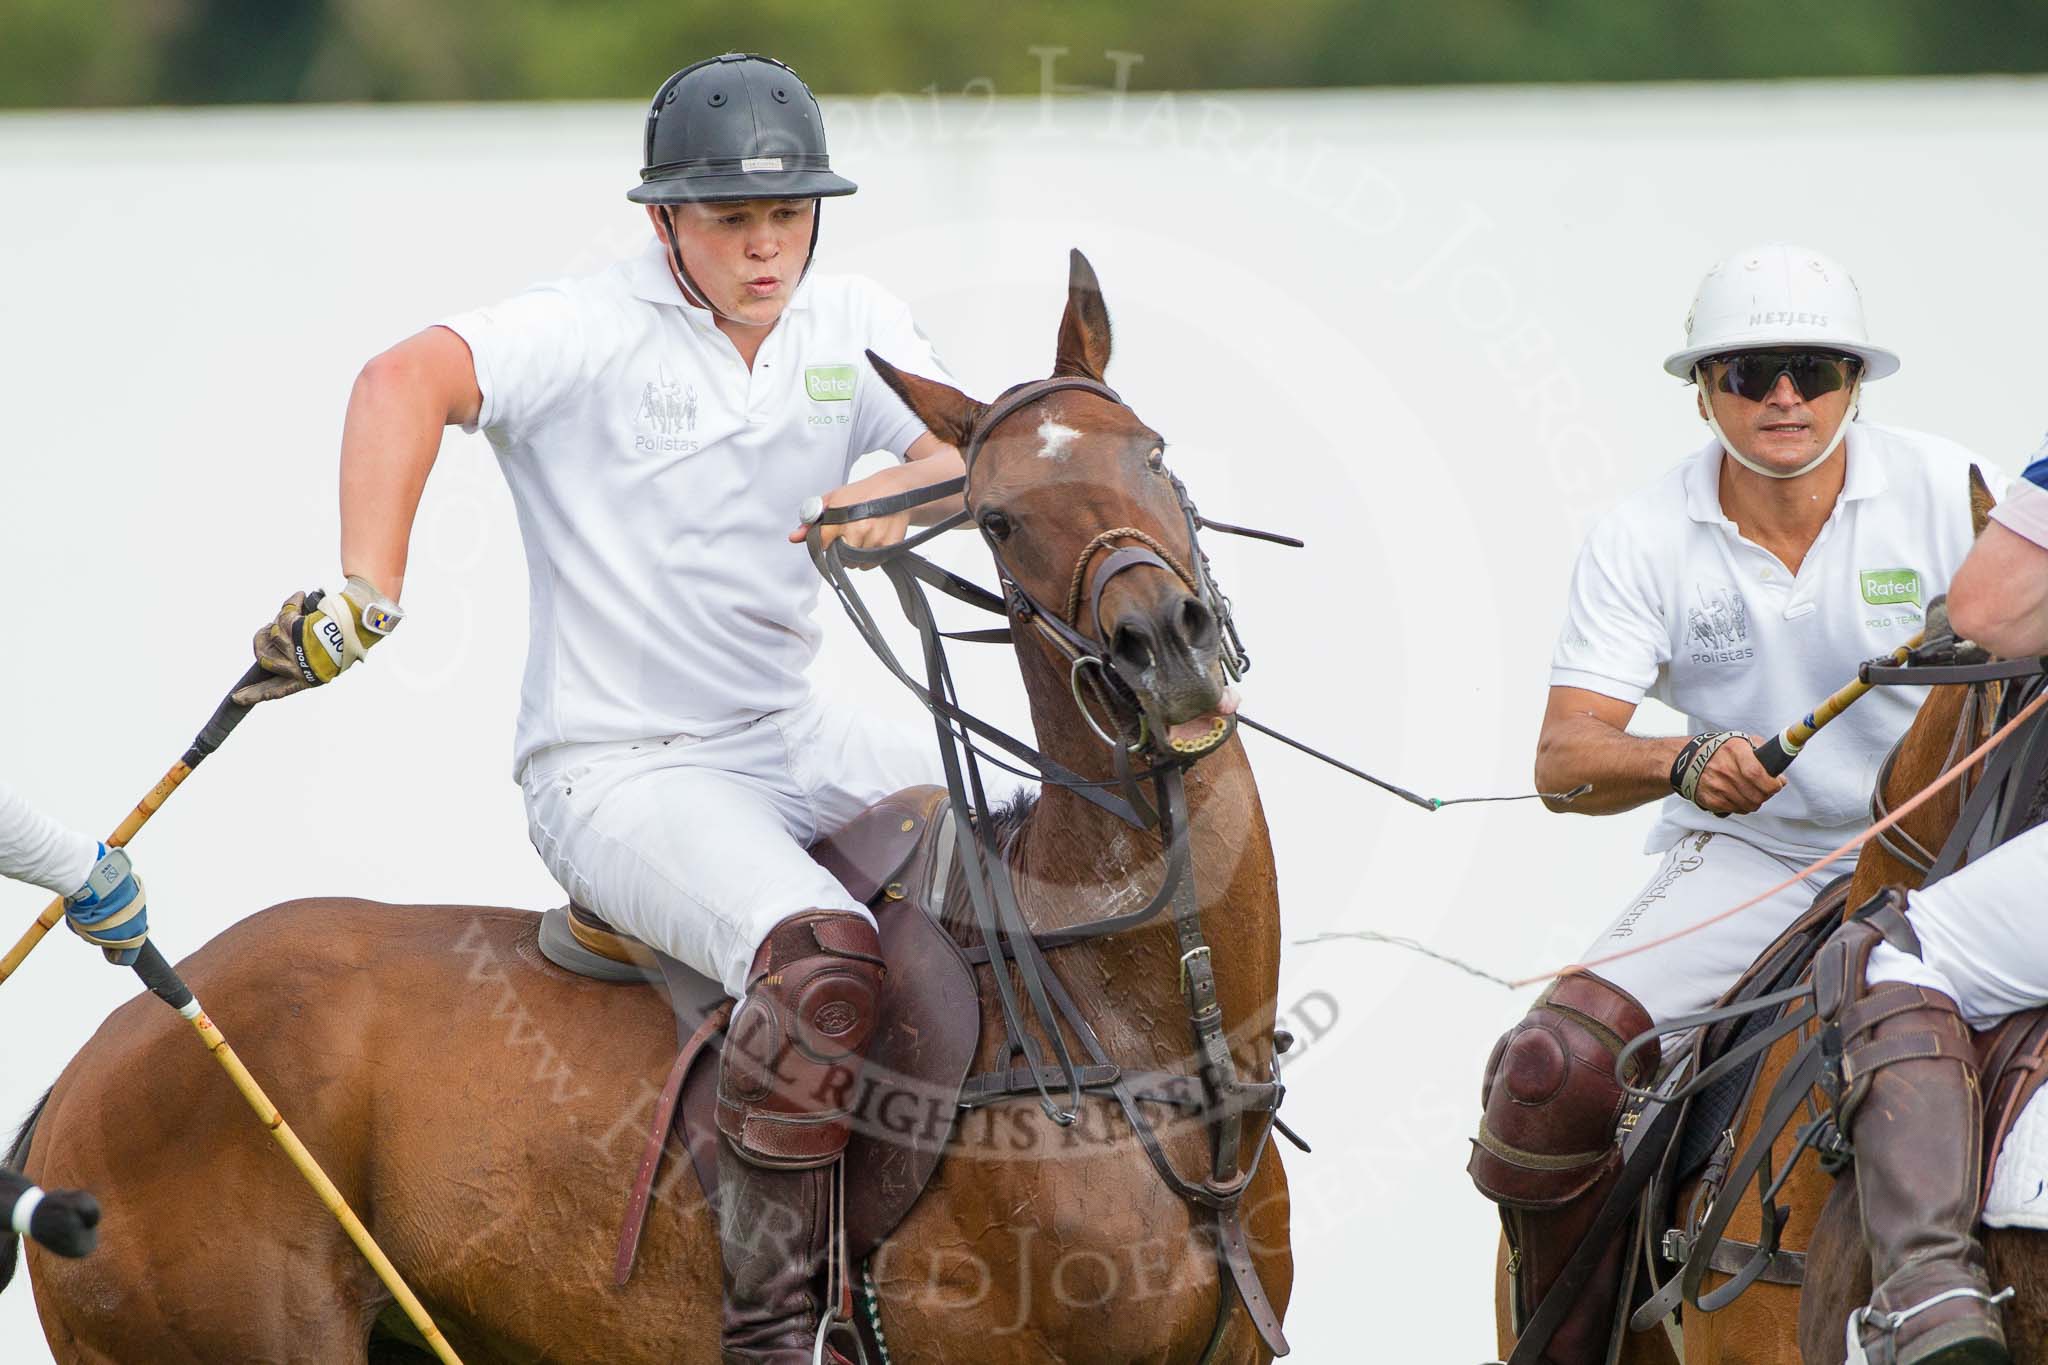 DBPC Polo in the Park 2012: Rated People Polo Team #3, Alex Vent, and #2, Tariq Dag Khan..
Dallas Burston Polo Club,
Stoneythorpe Estate,
Southam,
Warwickshire,
United Kingdom,
on 16 September 2012 at 11:02, image #67